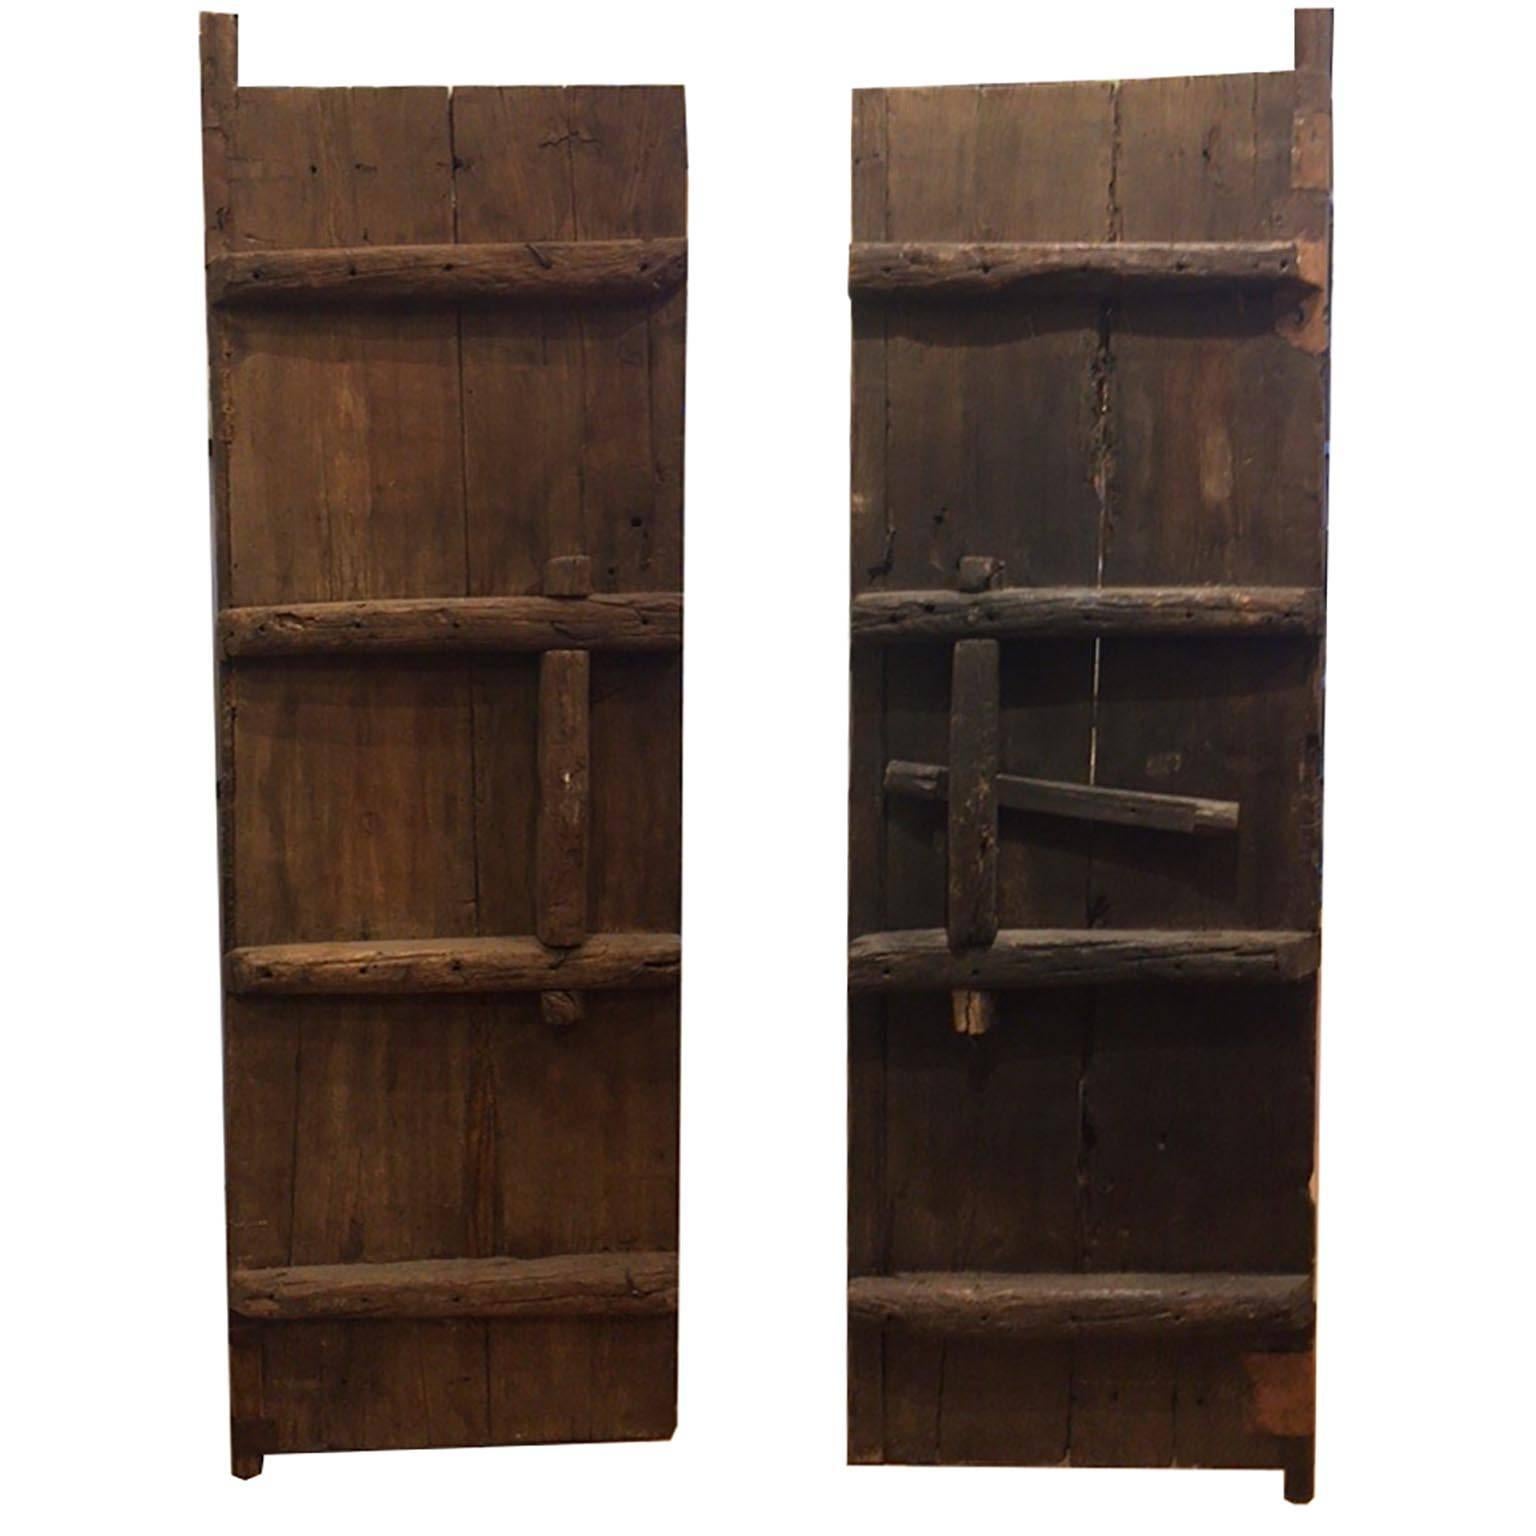 Late 19th c. Studded Elmood and Cast Iron Chinese Garden Gate Doors c. 1860-1890 2